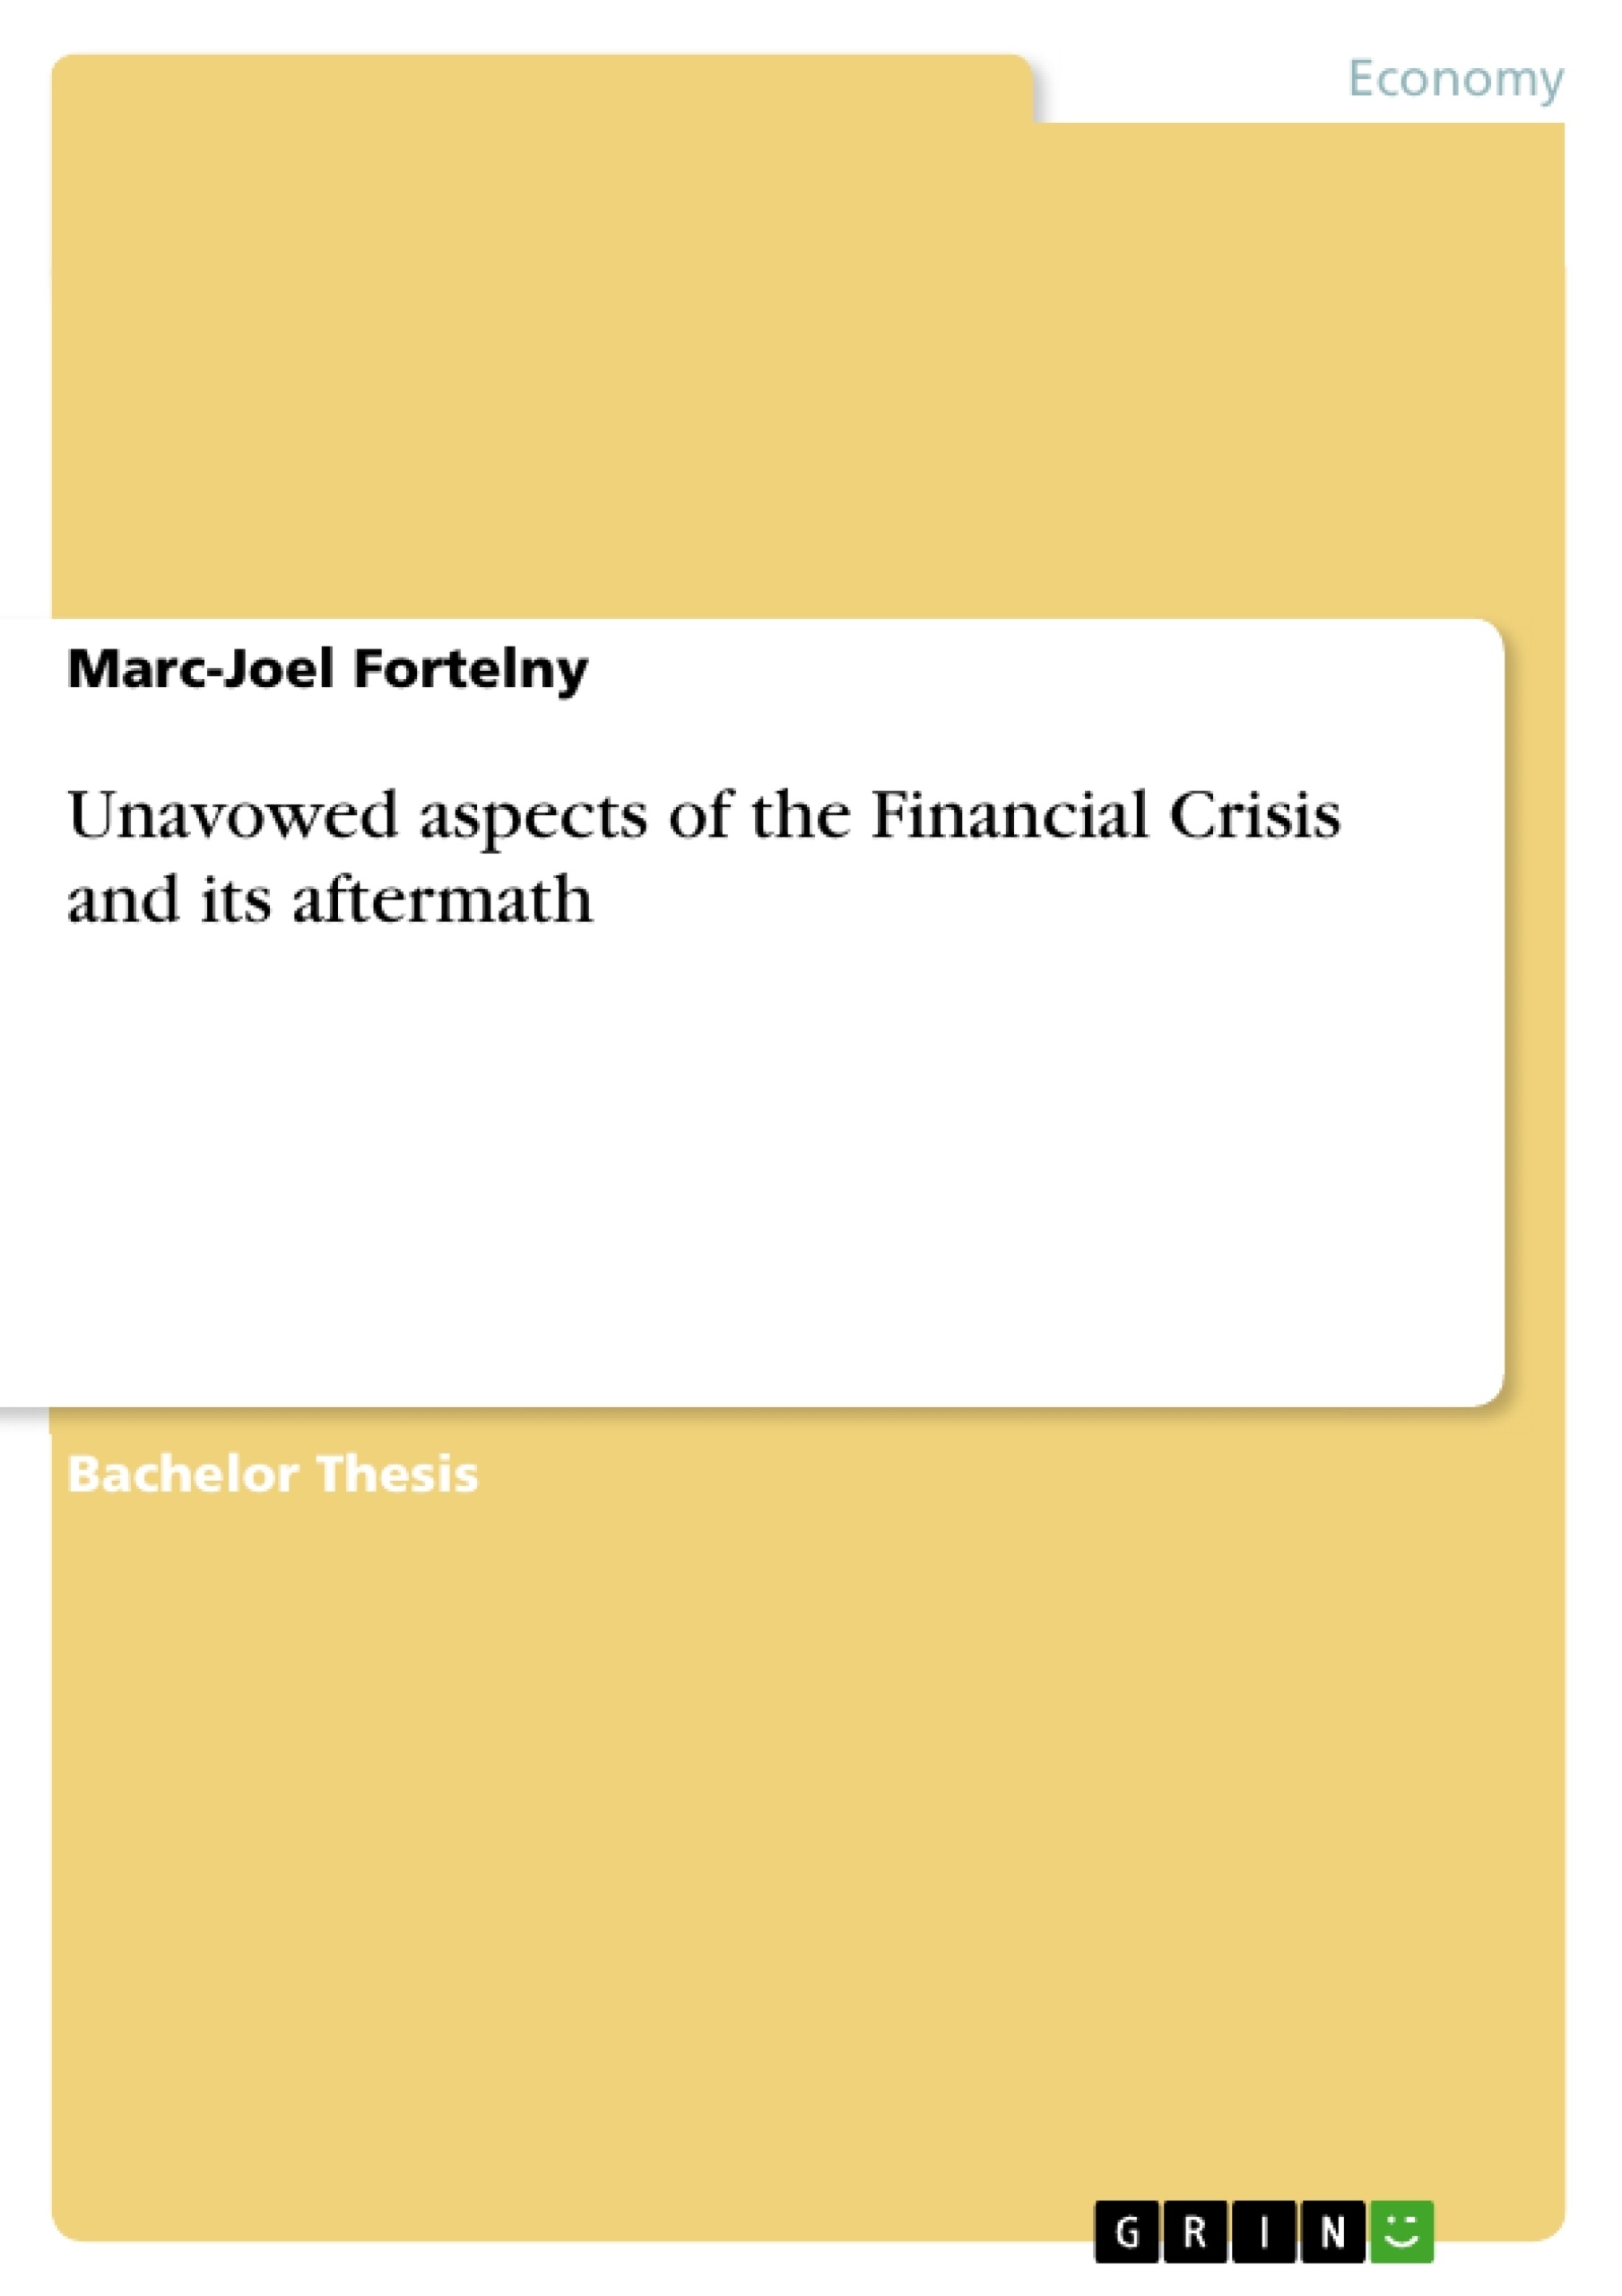 Titre: Unavowed aspects of the Financial Crisis and its aftermath